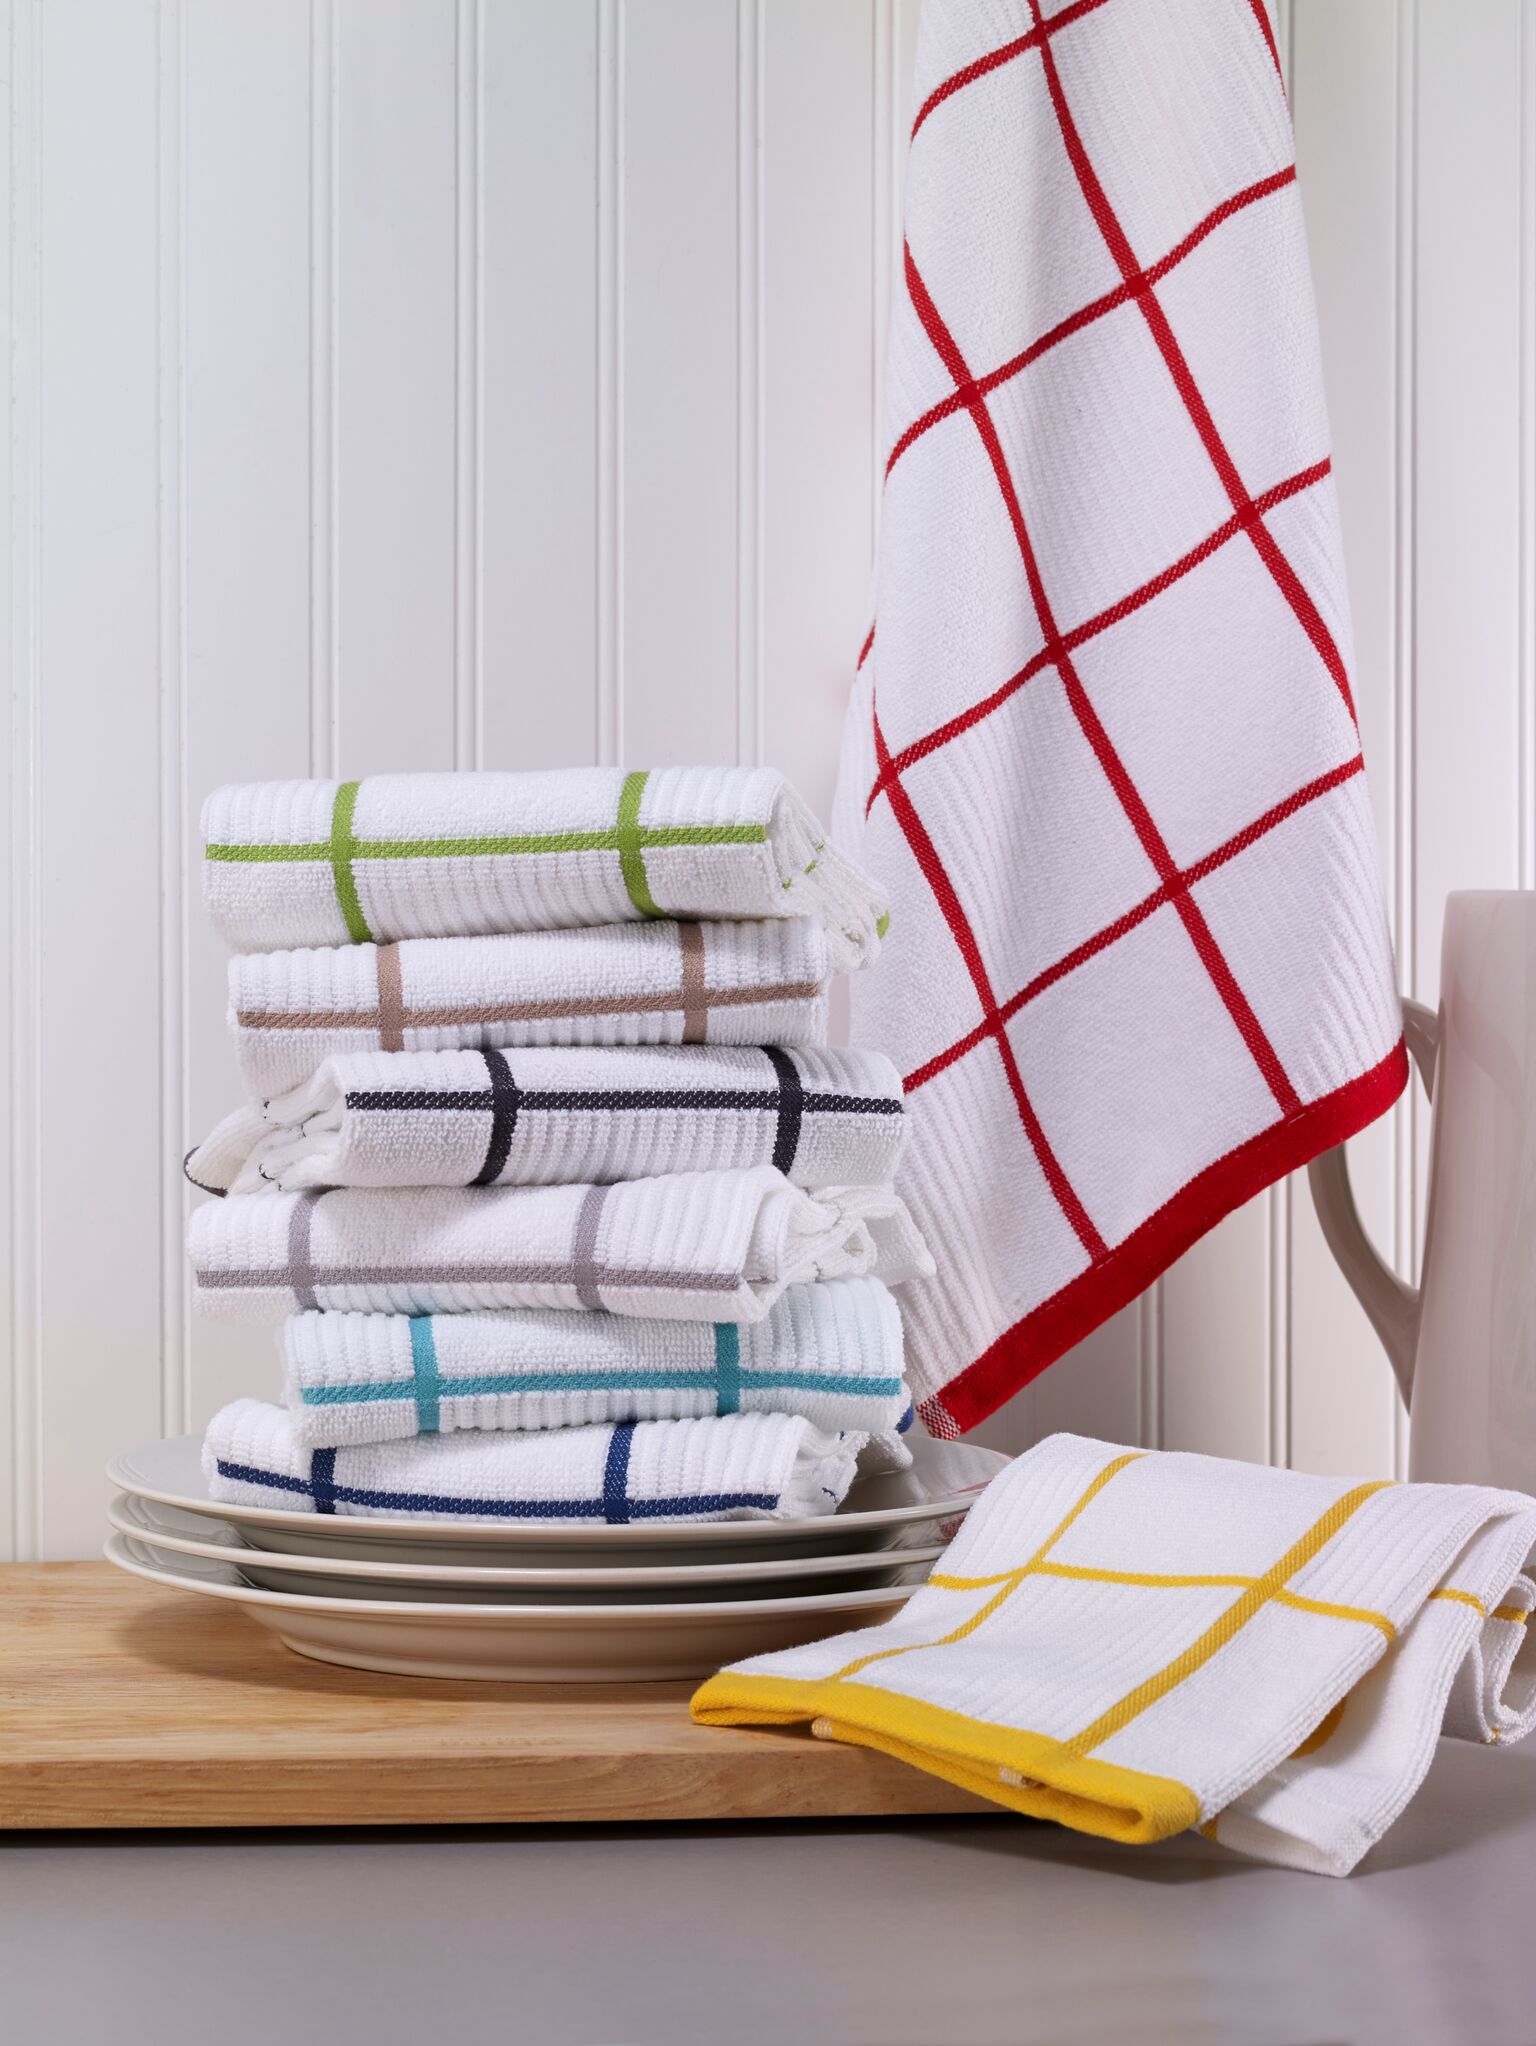 T-fal Textiles Striped 100% Terry Cotton Oversized Waffle Kitchen Towel  (16-Inch by 28-Inch) - John Ritzenthaler Company